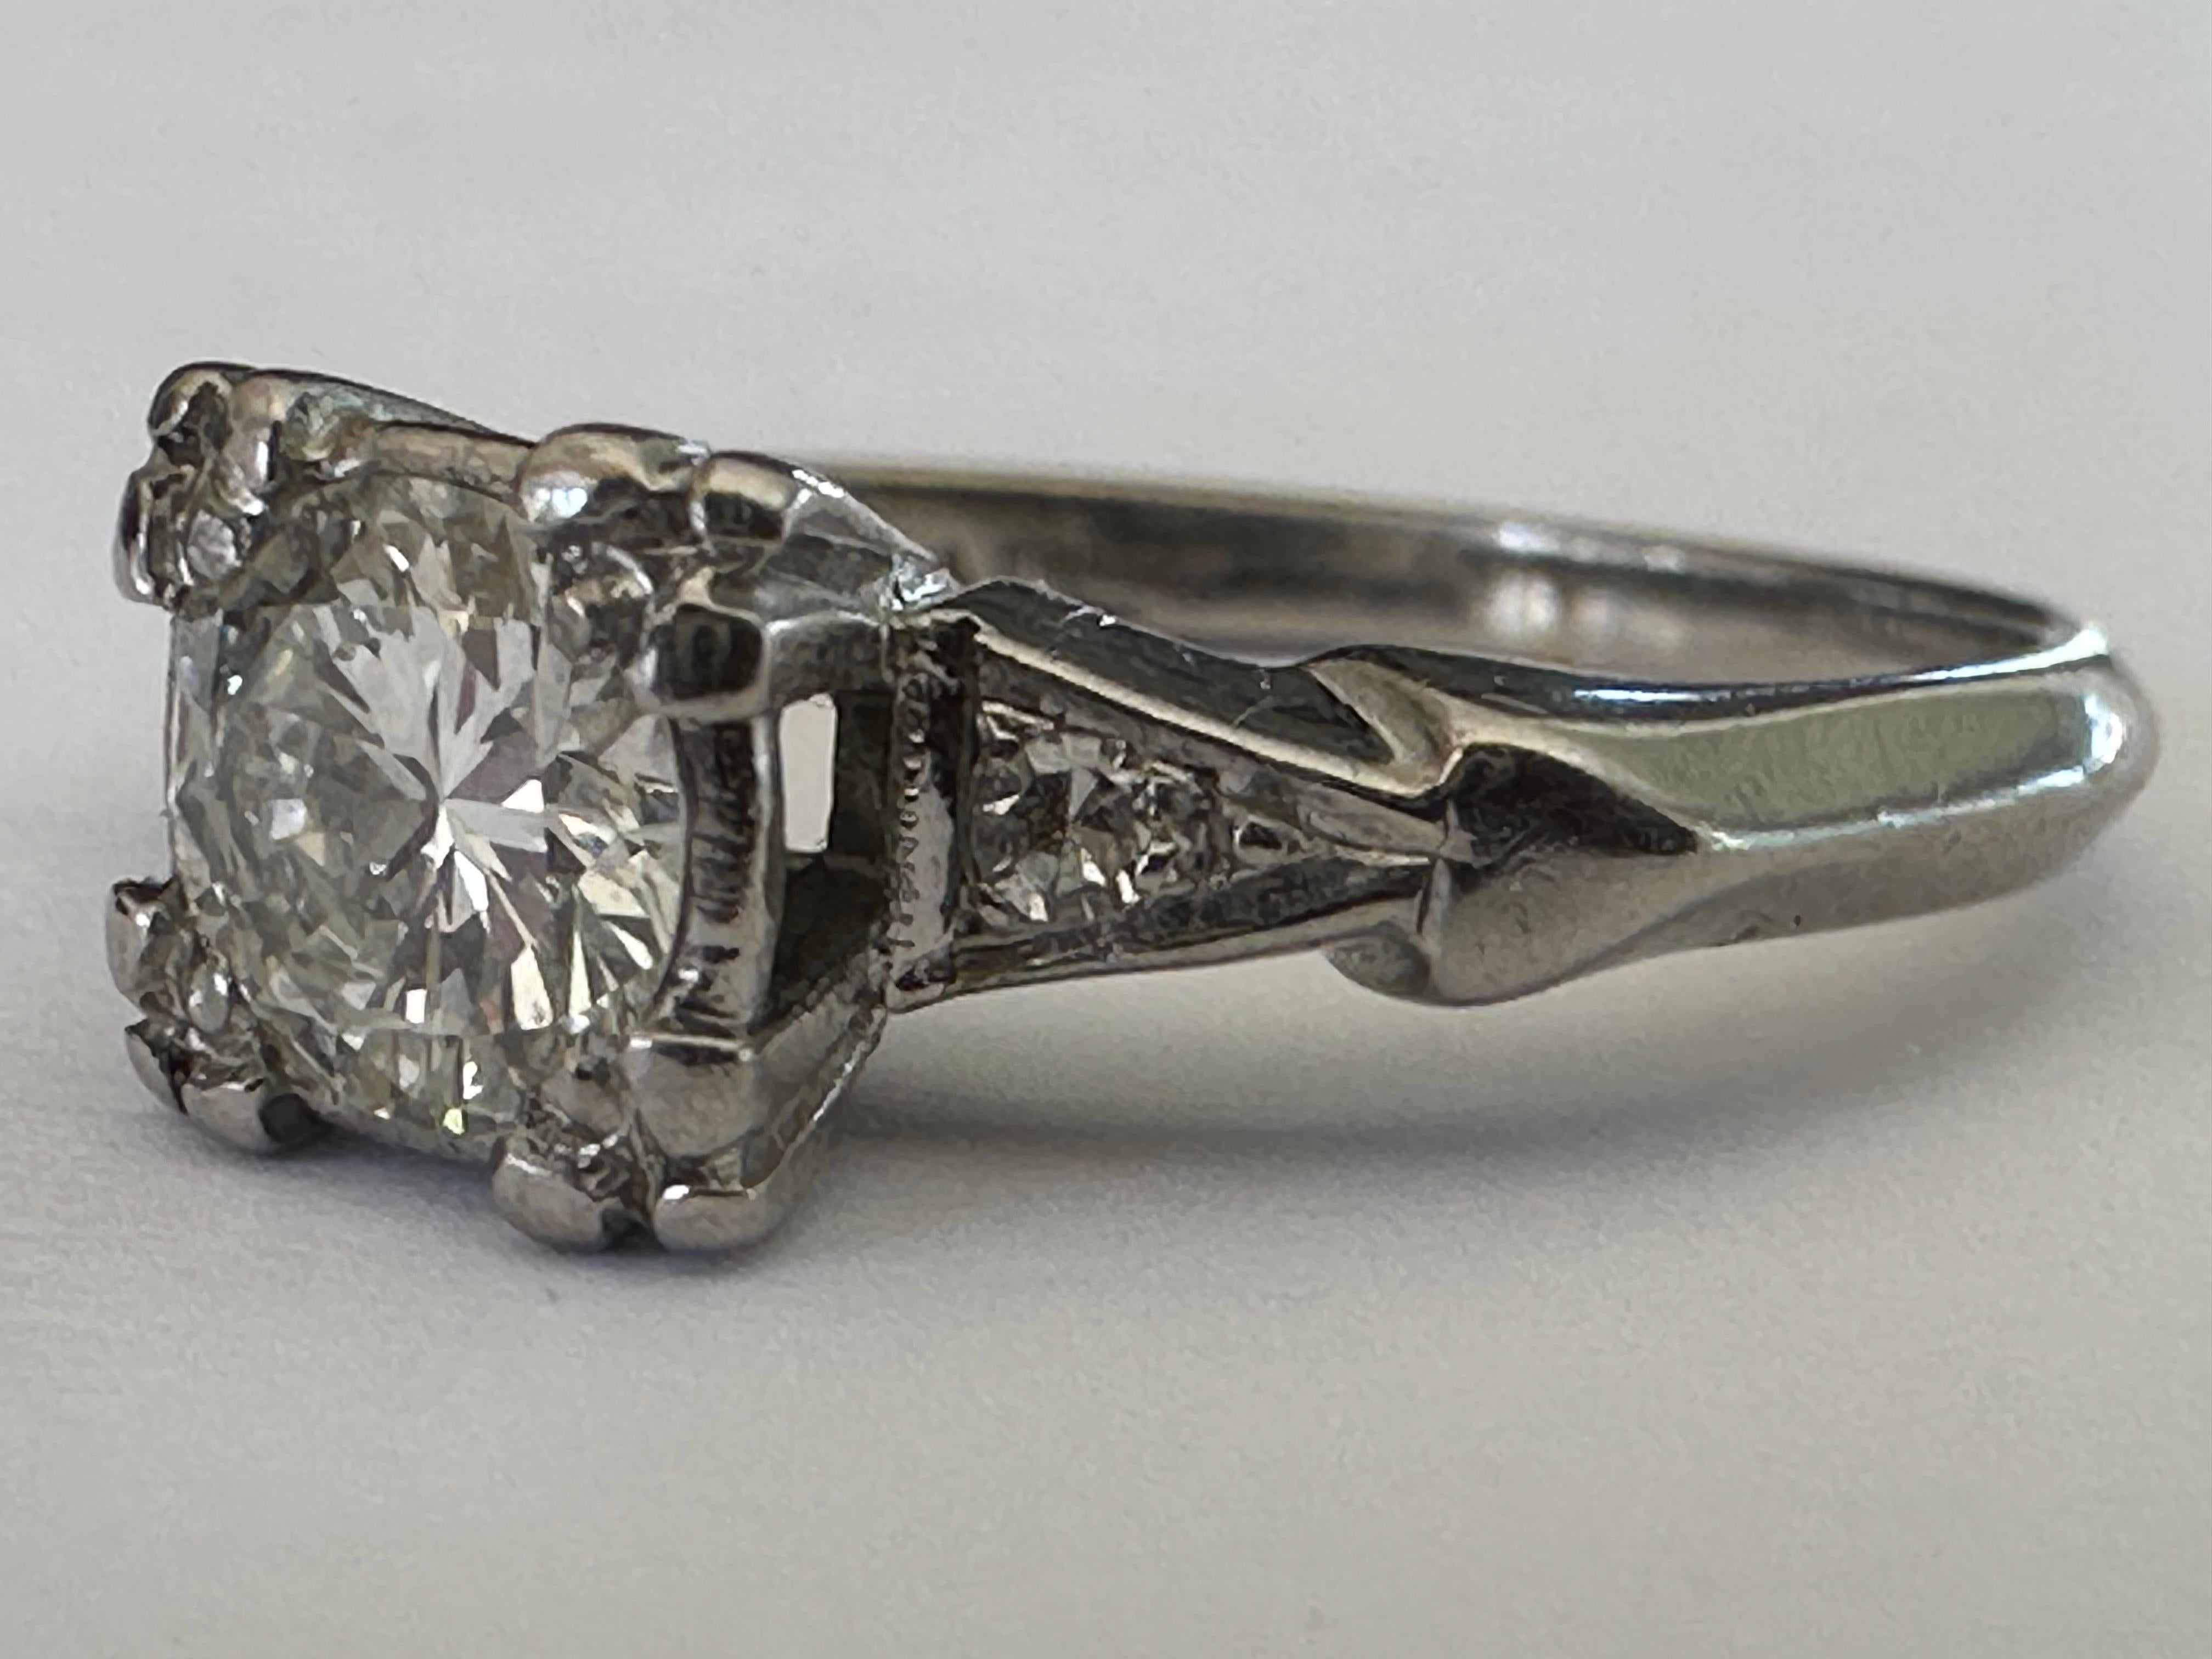 A bold Old European-cut diamond center stone totaling approximately 0.45 carat, F color VS1+ clarity and measuring 5mm, shines brilliantly between two single cut diamonds.  Set in palladium. This mid-century diamond three-stone ring was most likely